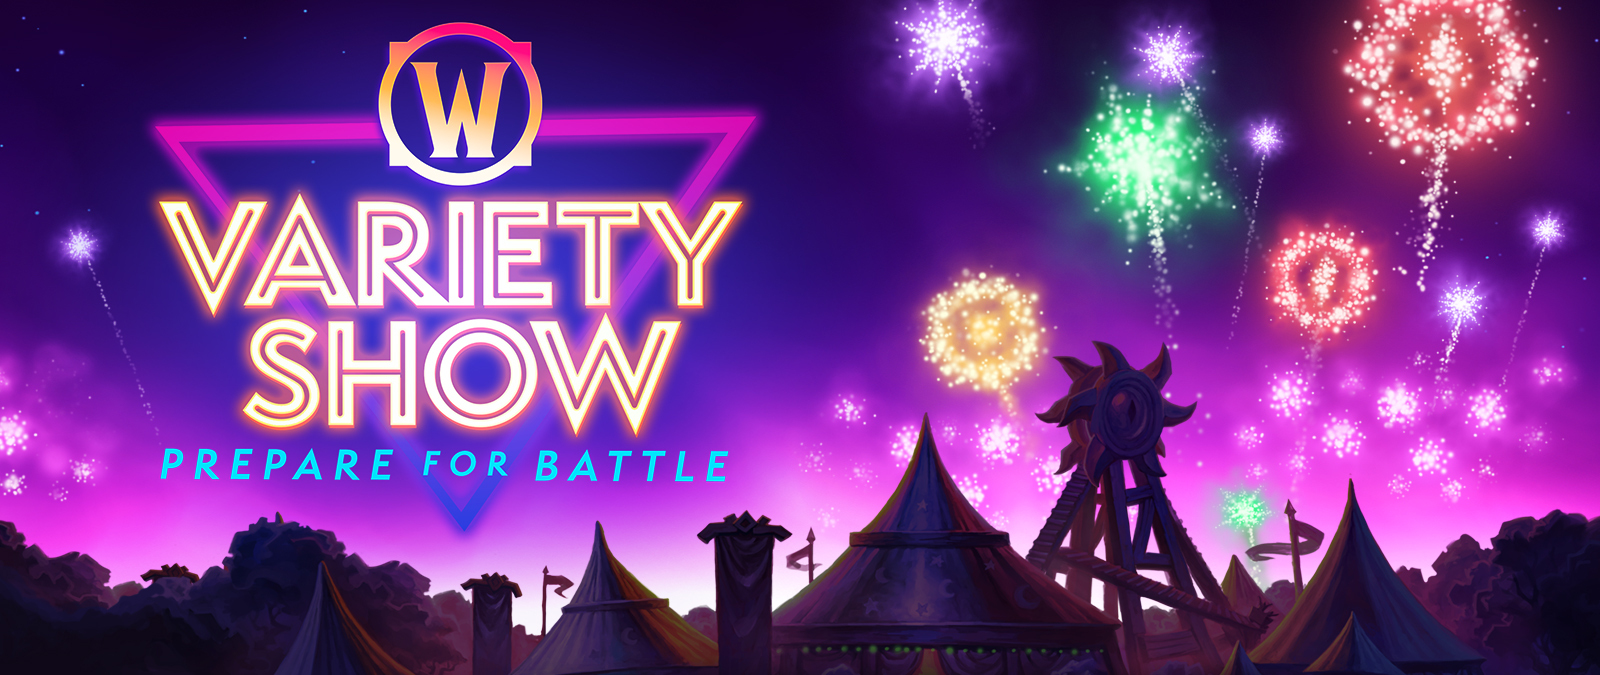 Blizzard Announces the WoW Variety Show on August 24! thumbnail